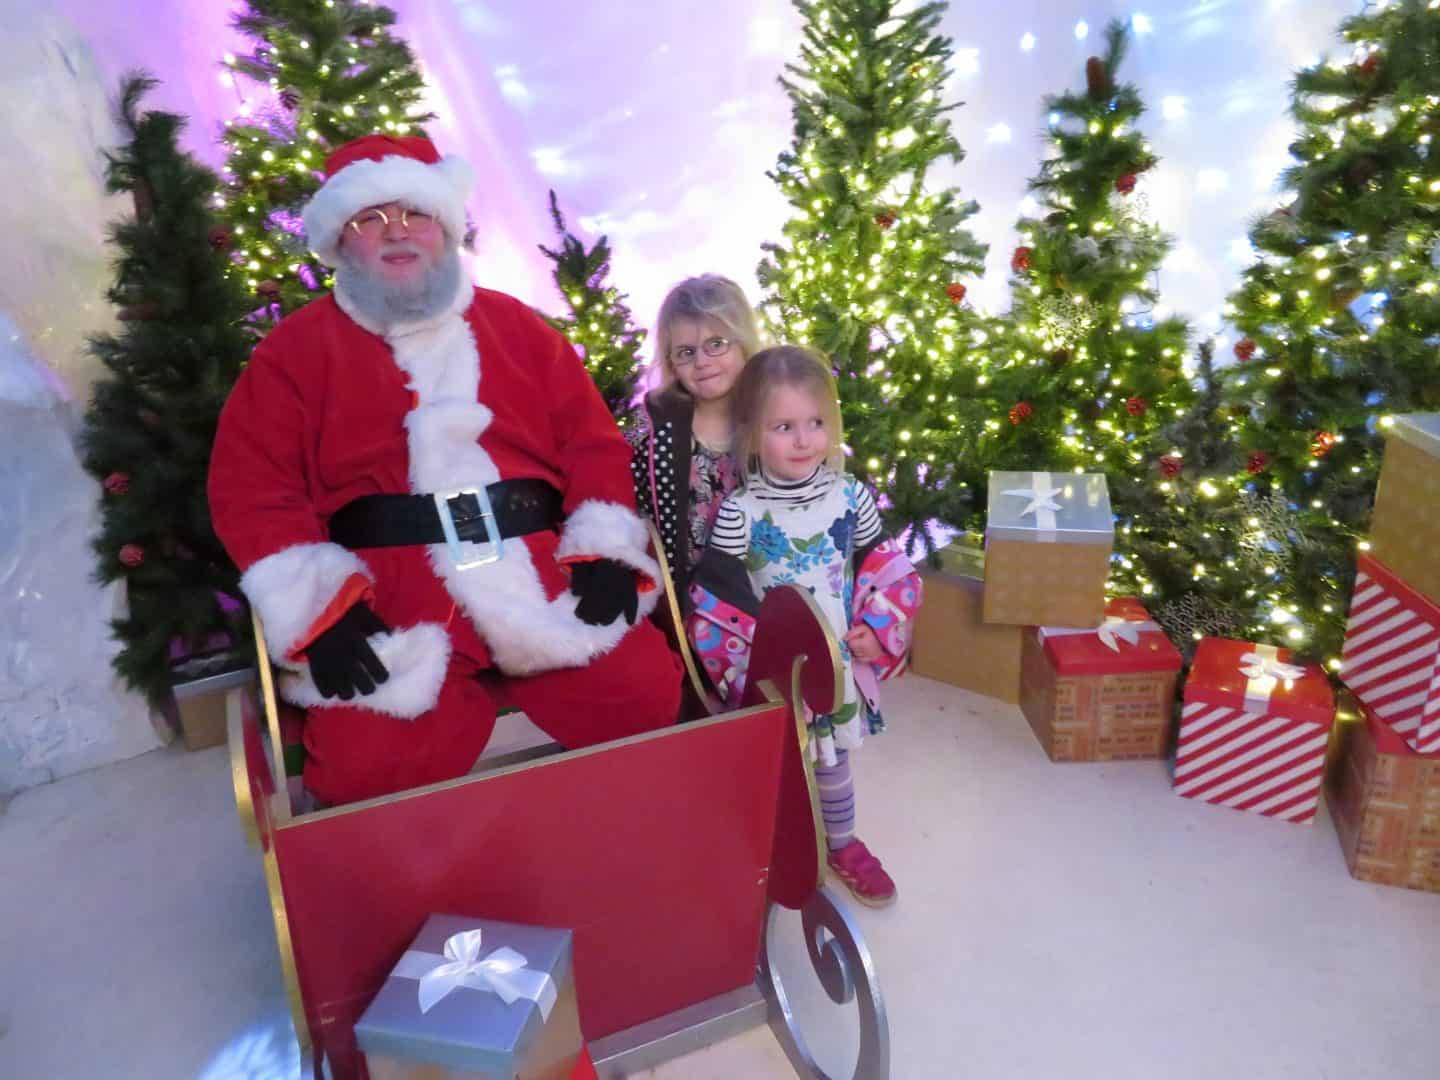 Santa in sleigh with two little girls, Christmas trees in the background